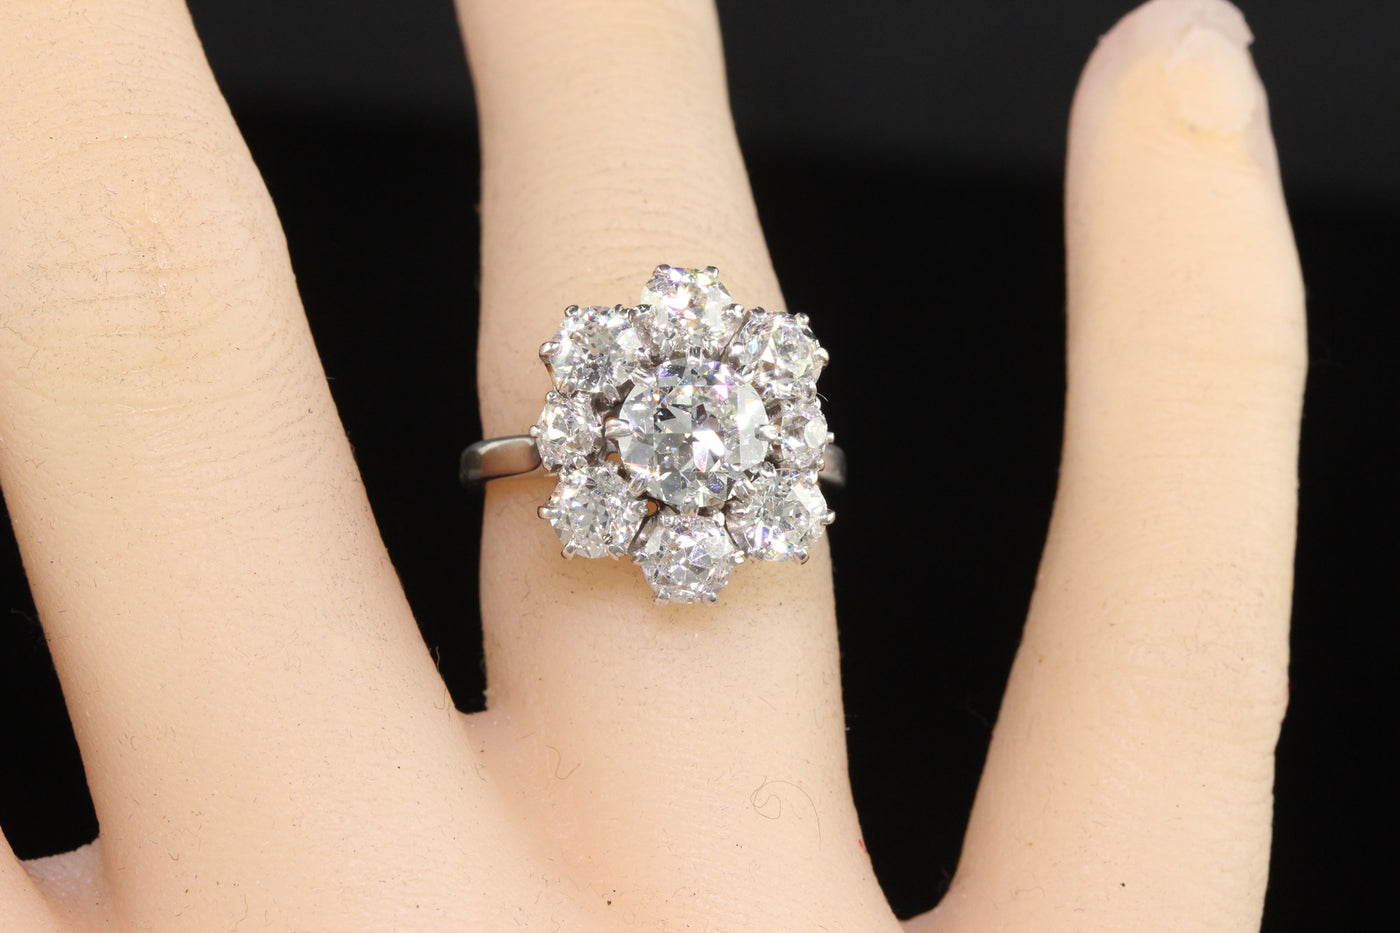 Vintage Estate French 18K White Gold Old Cut Diamond Cluster Engagement Ring - GIA